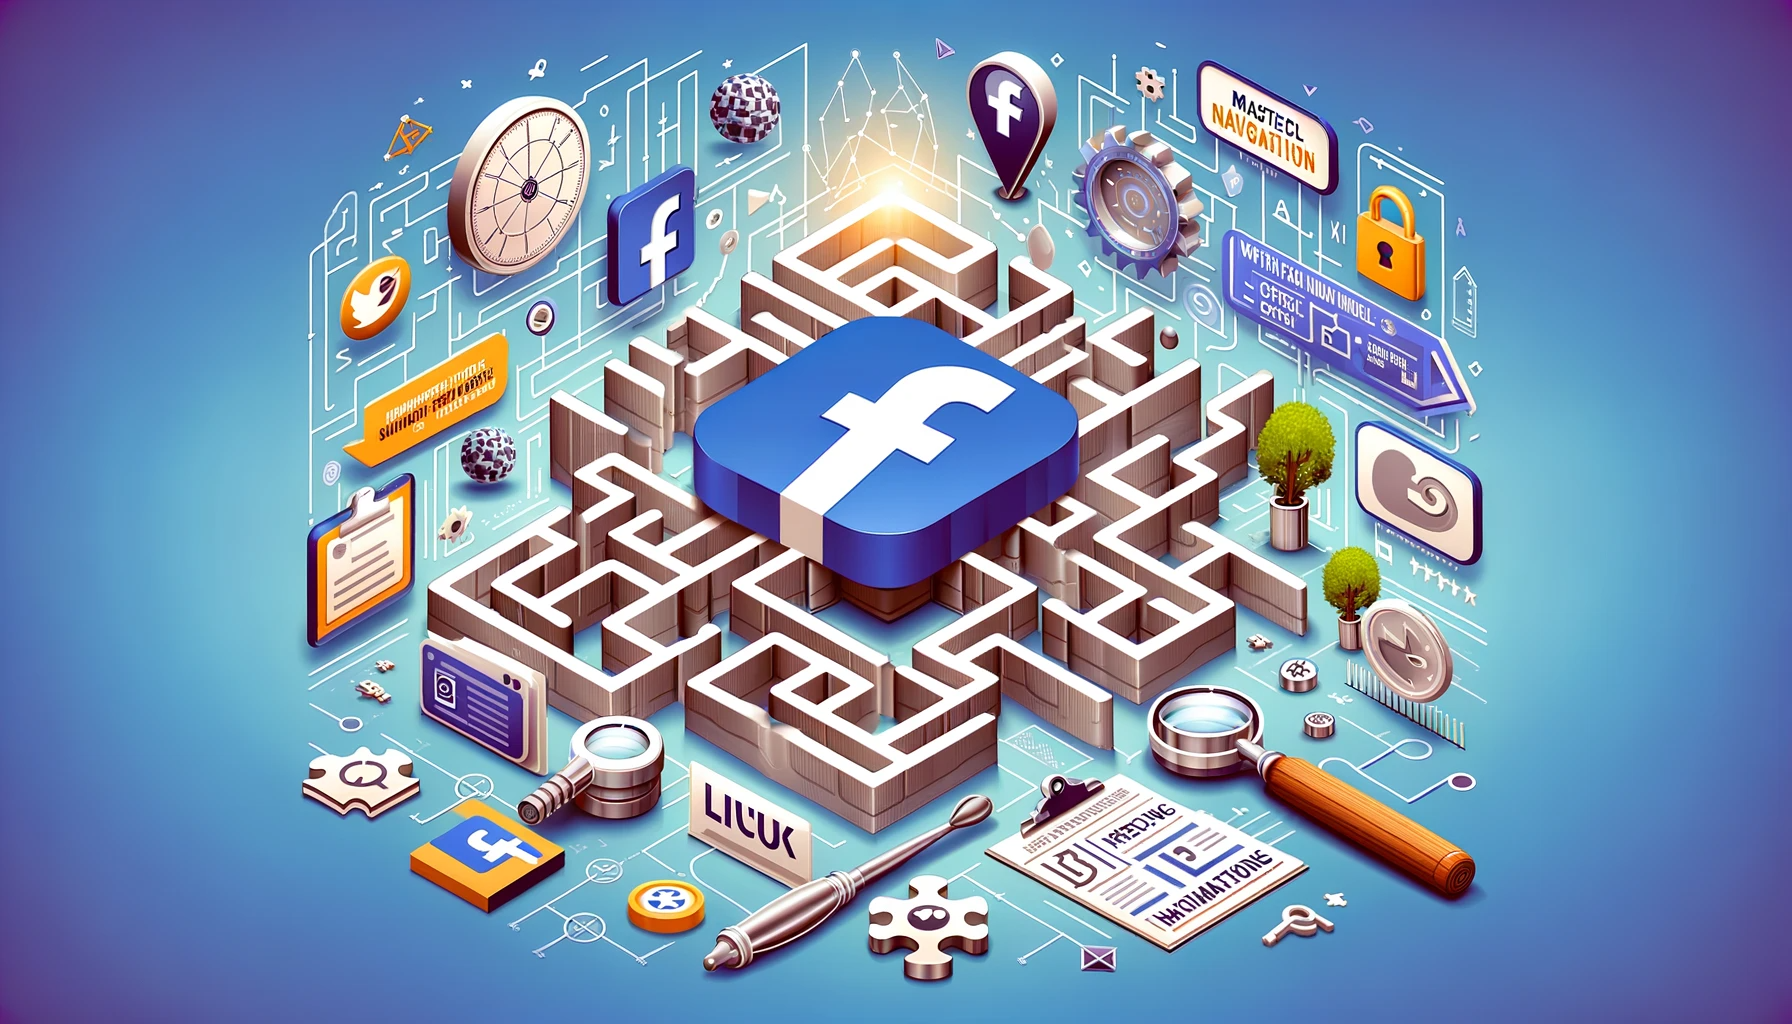 Navigating Facebook\\\'s Algorithm with Rank Panel Expertise